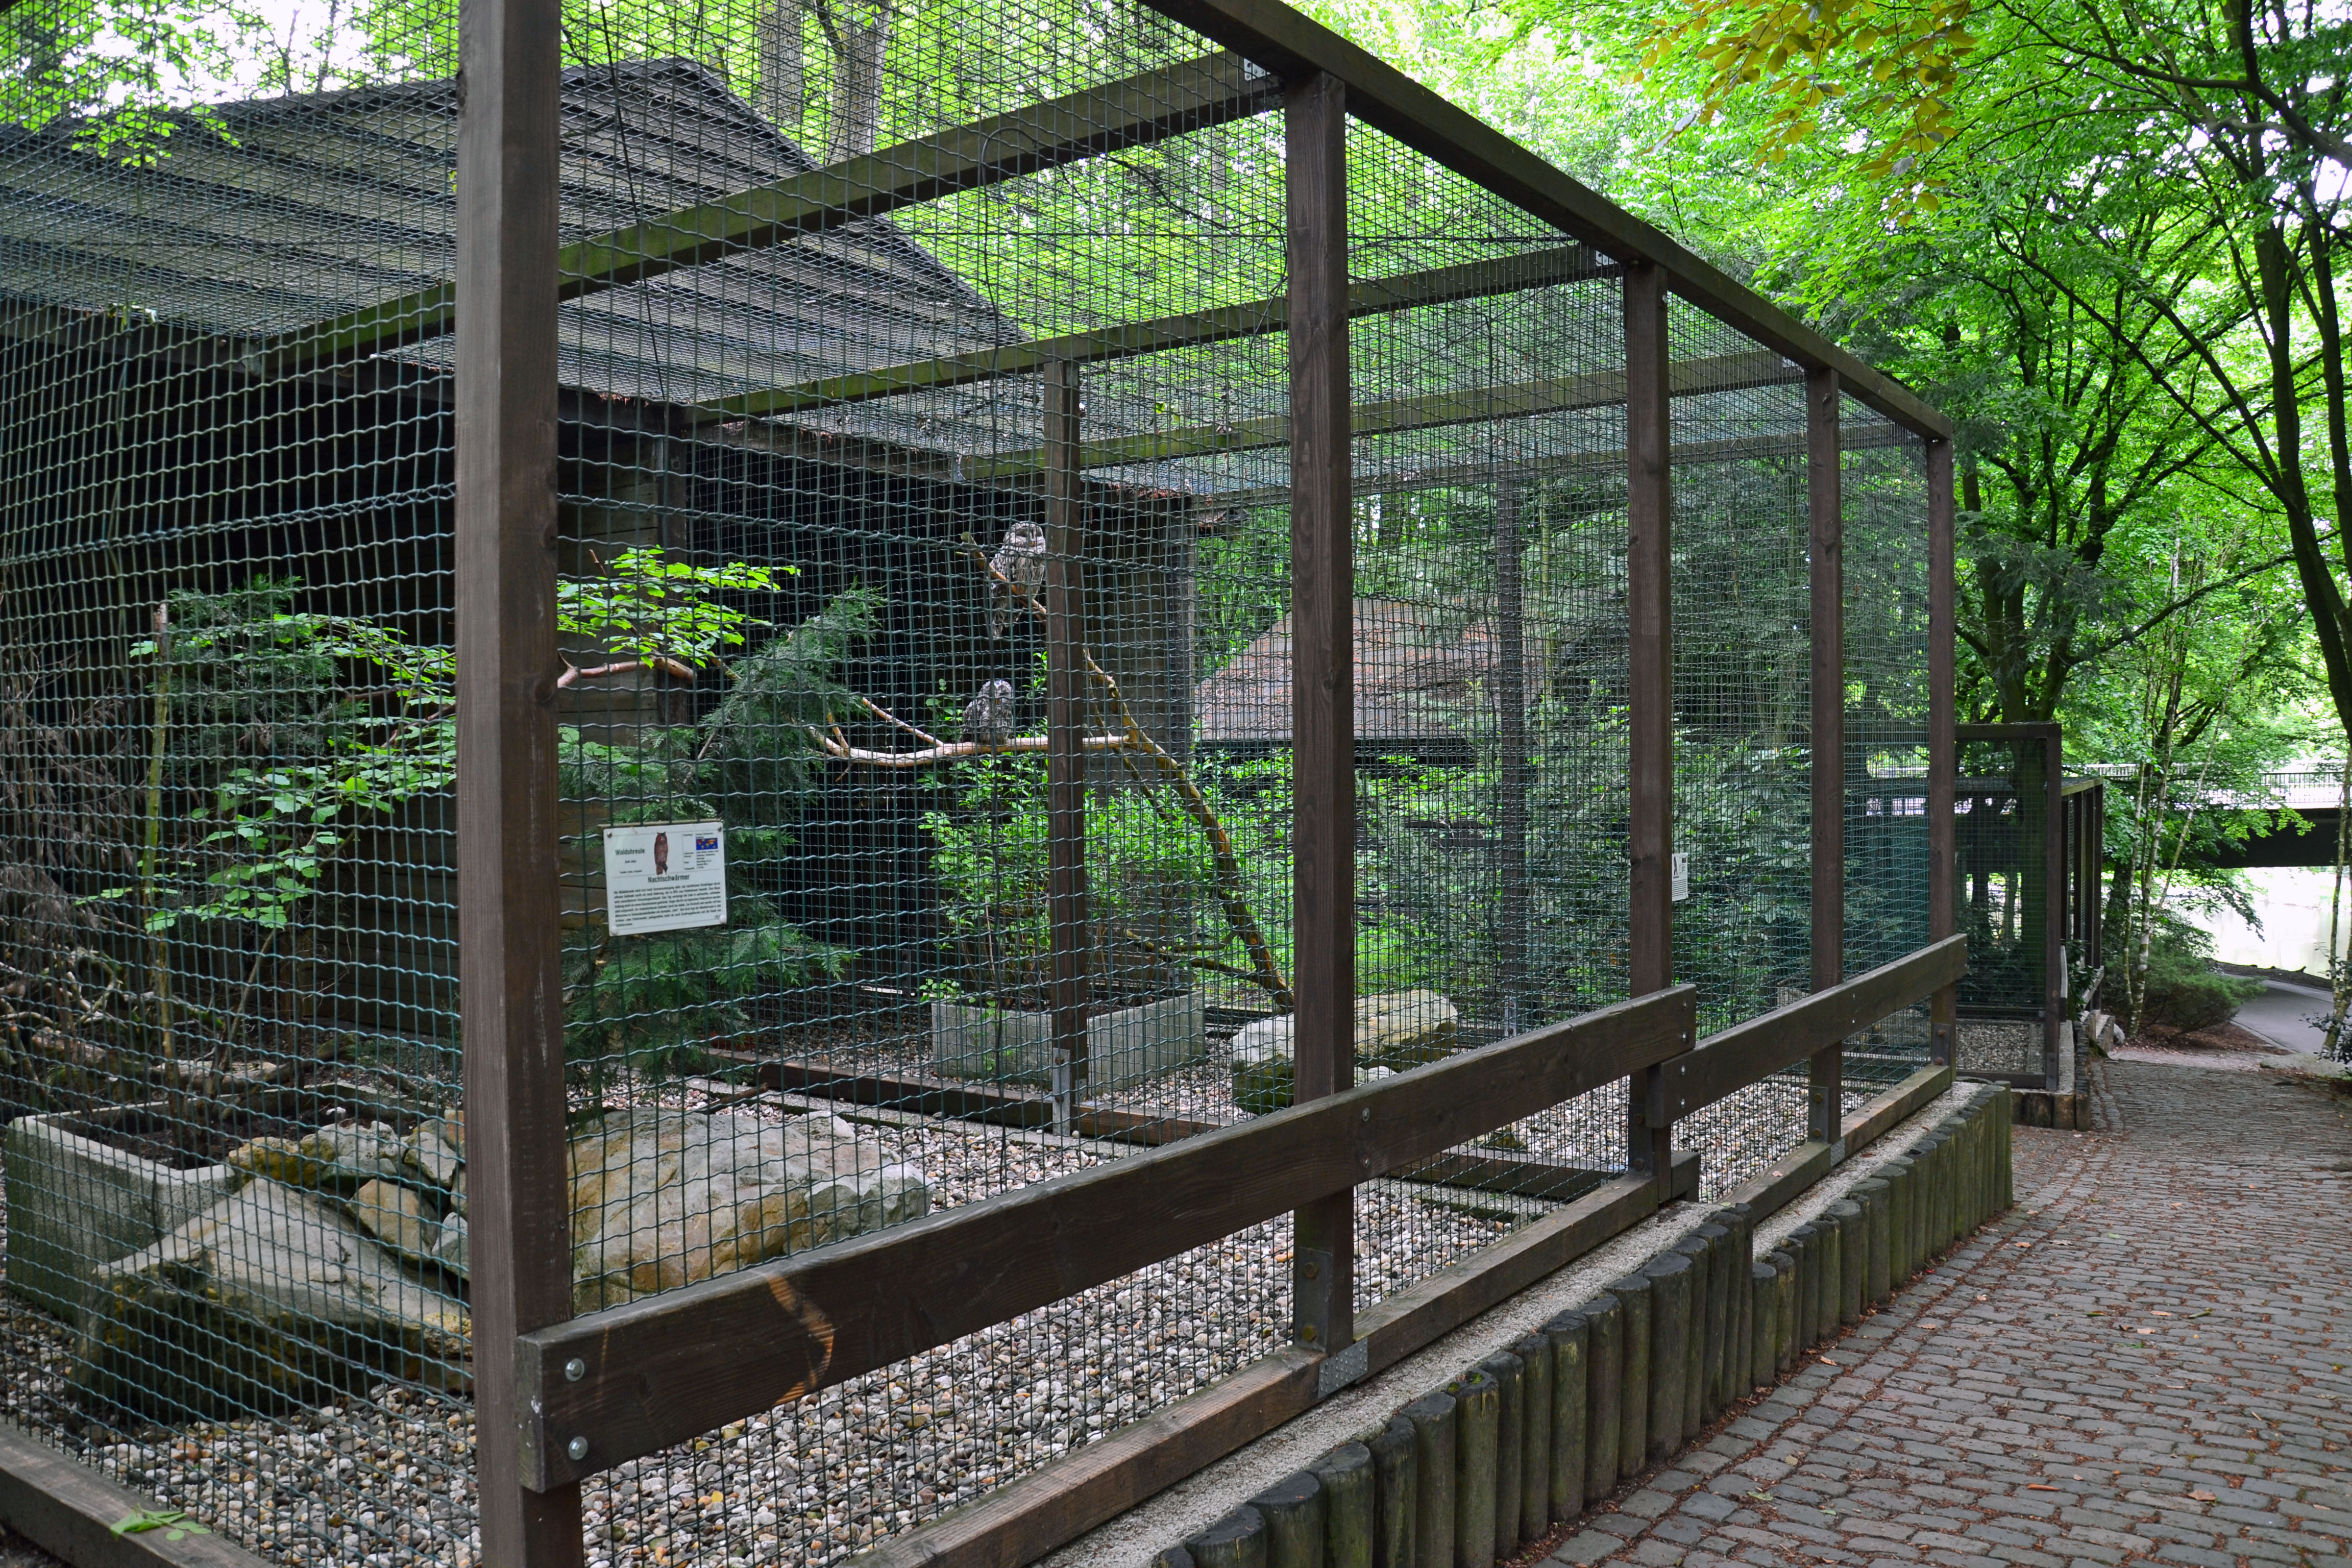 Wooden and wire fencing outdoor bird aviary